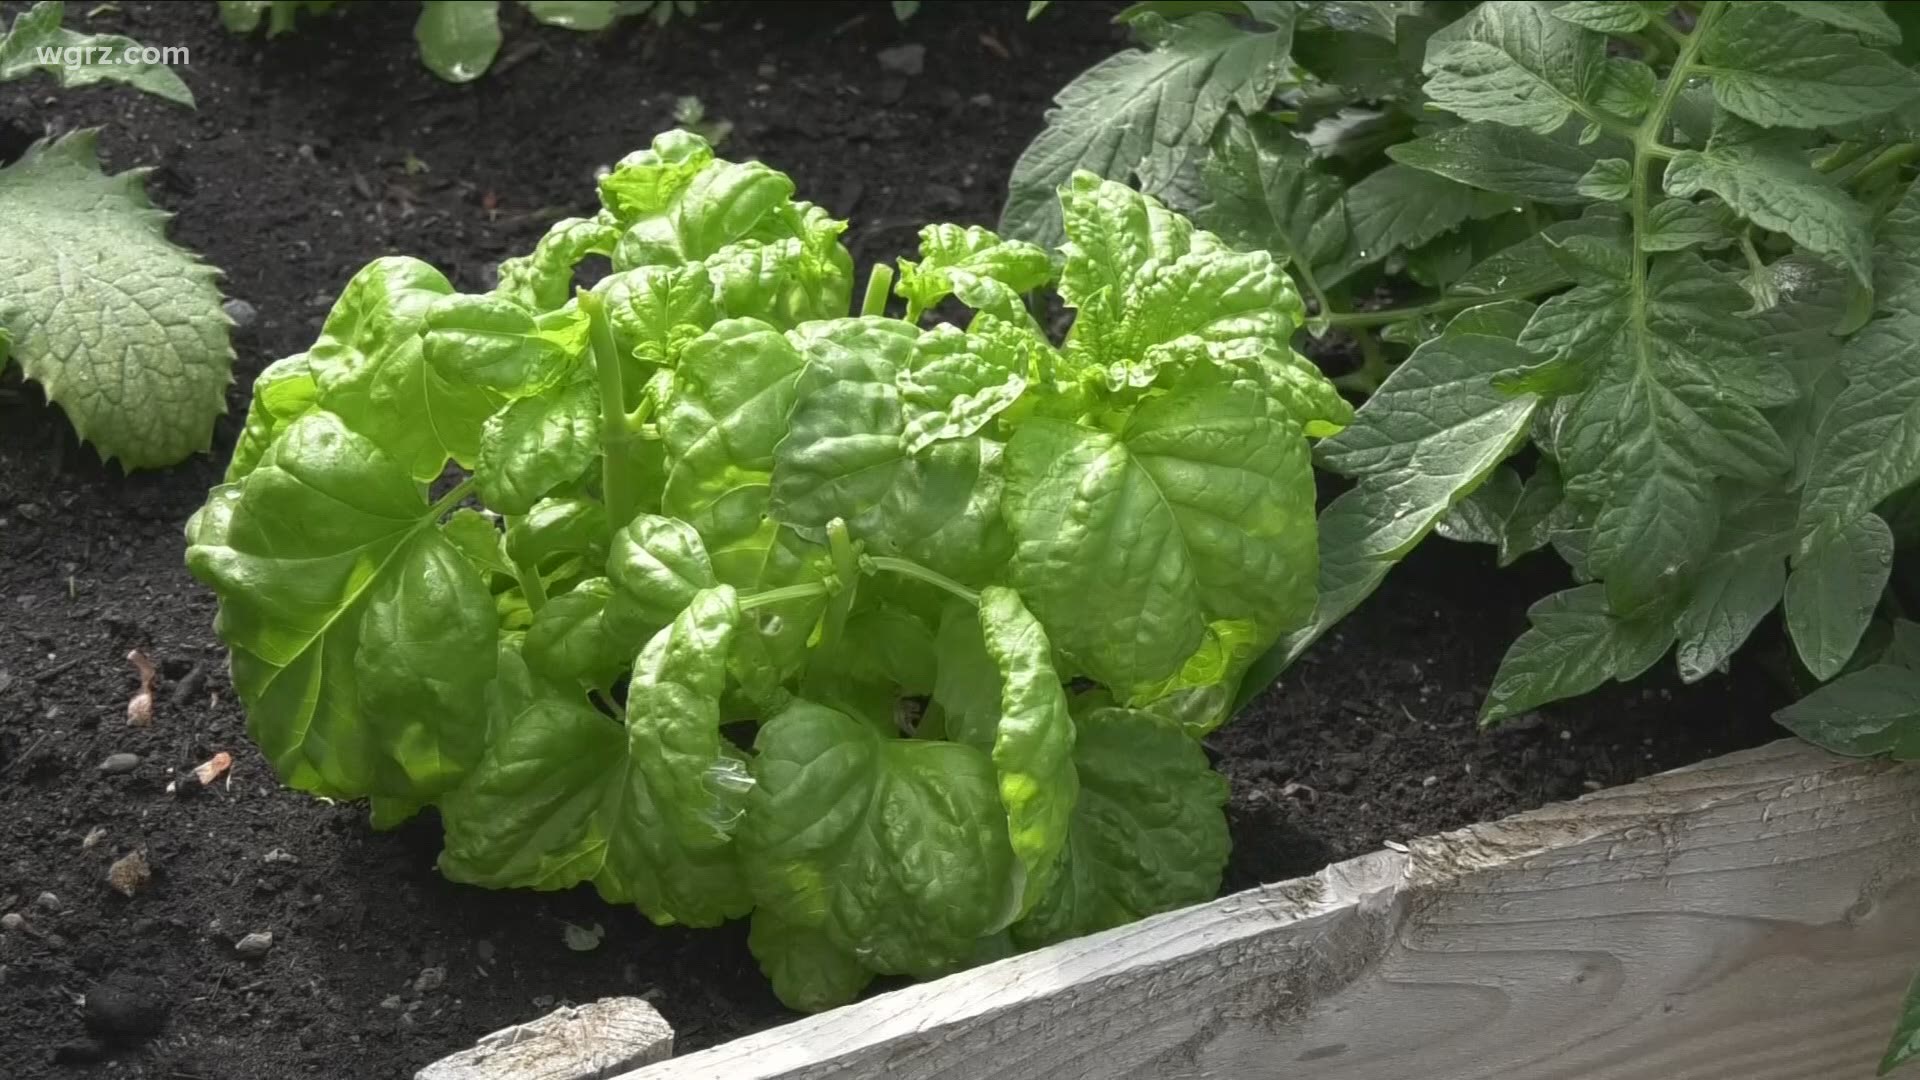 Gardening expert Jackie Albarella explains why it's important to pick your vegetables and herbs.